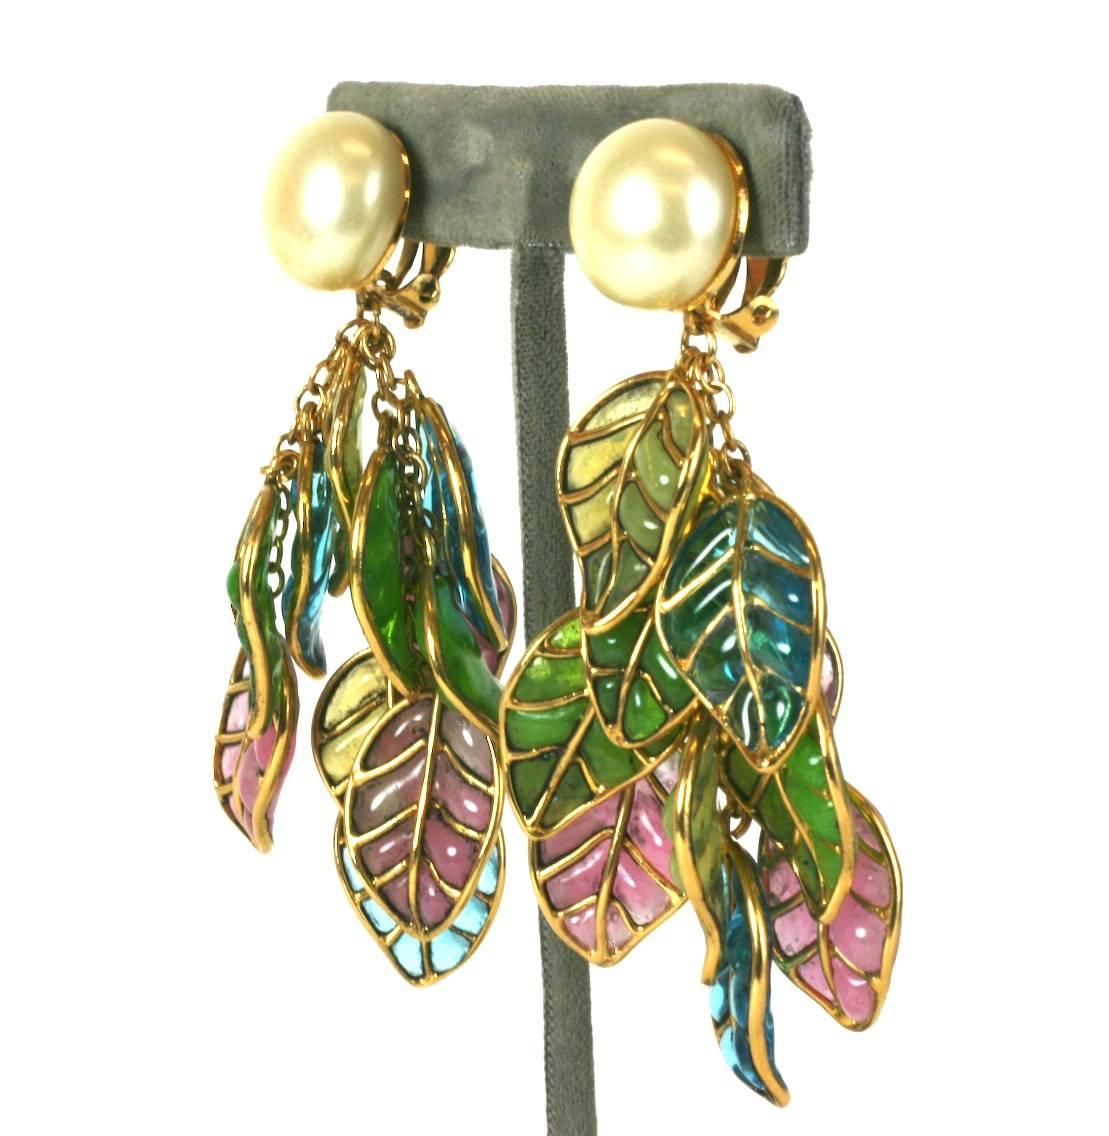 Chanel Pearl and Pastel Pate de Verre Leaf earclips by Maison Gripoix. Faux pearl top with clip back fittings suspend a series of pastel hand poured glass leaves. Beautifully detailed with hand made metal leaves filled with different colored glass.